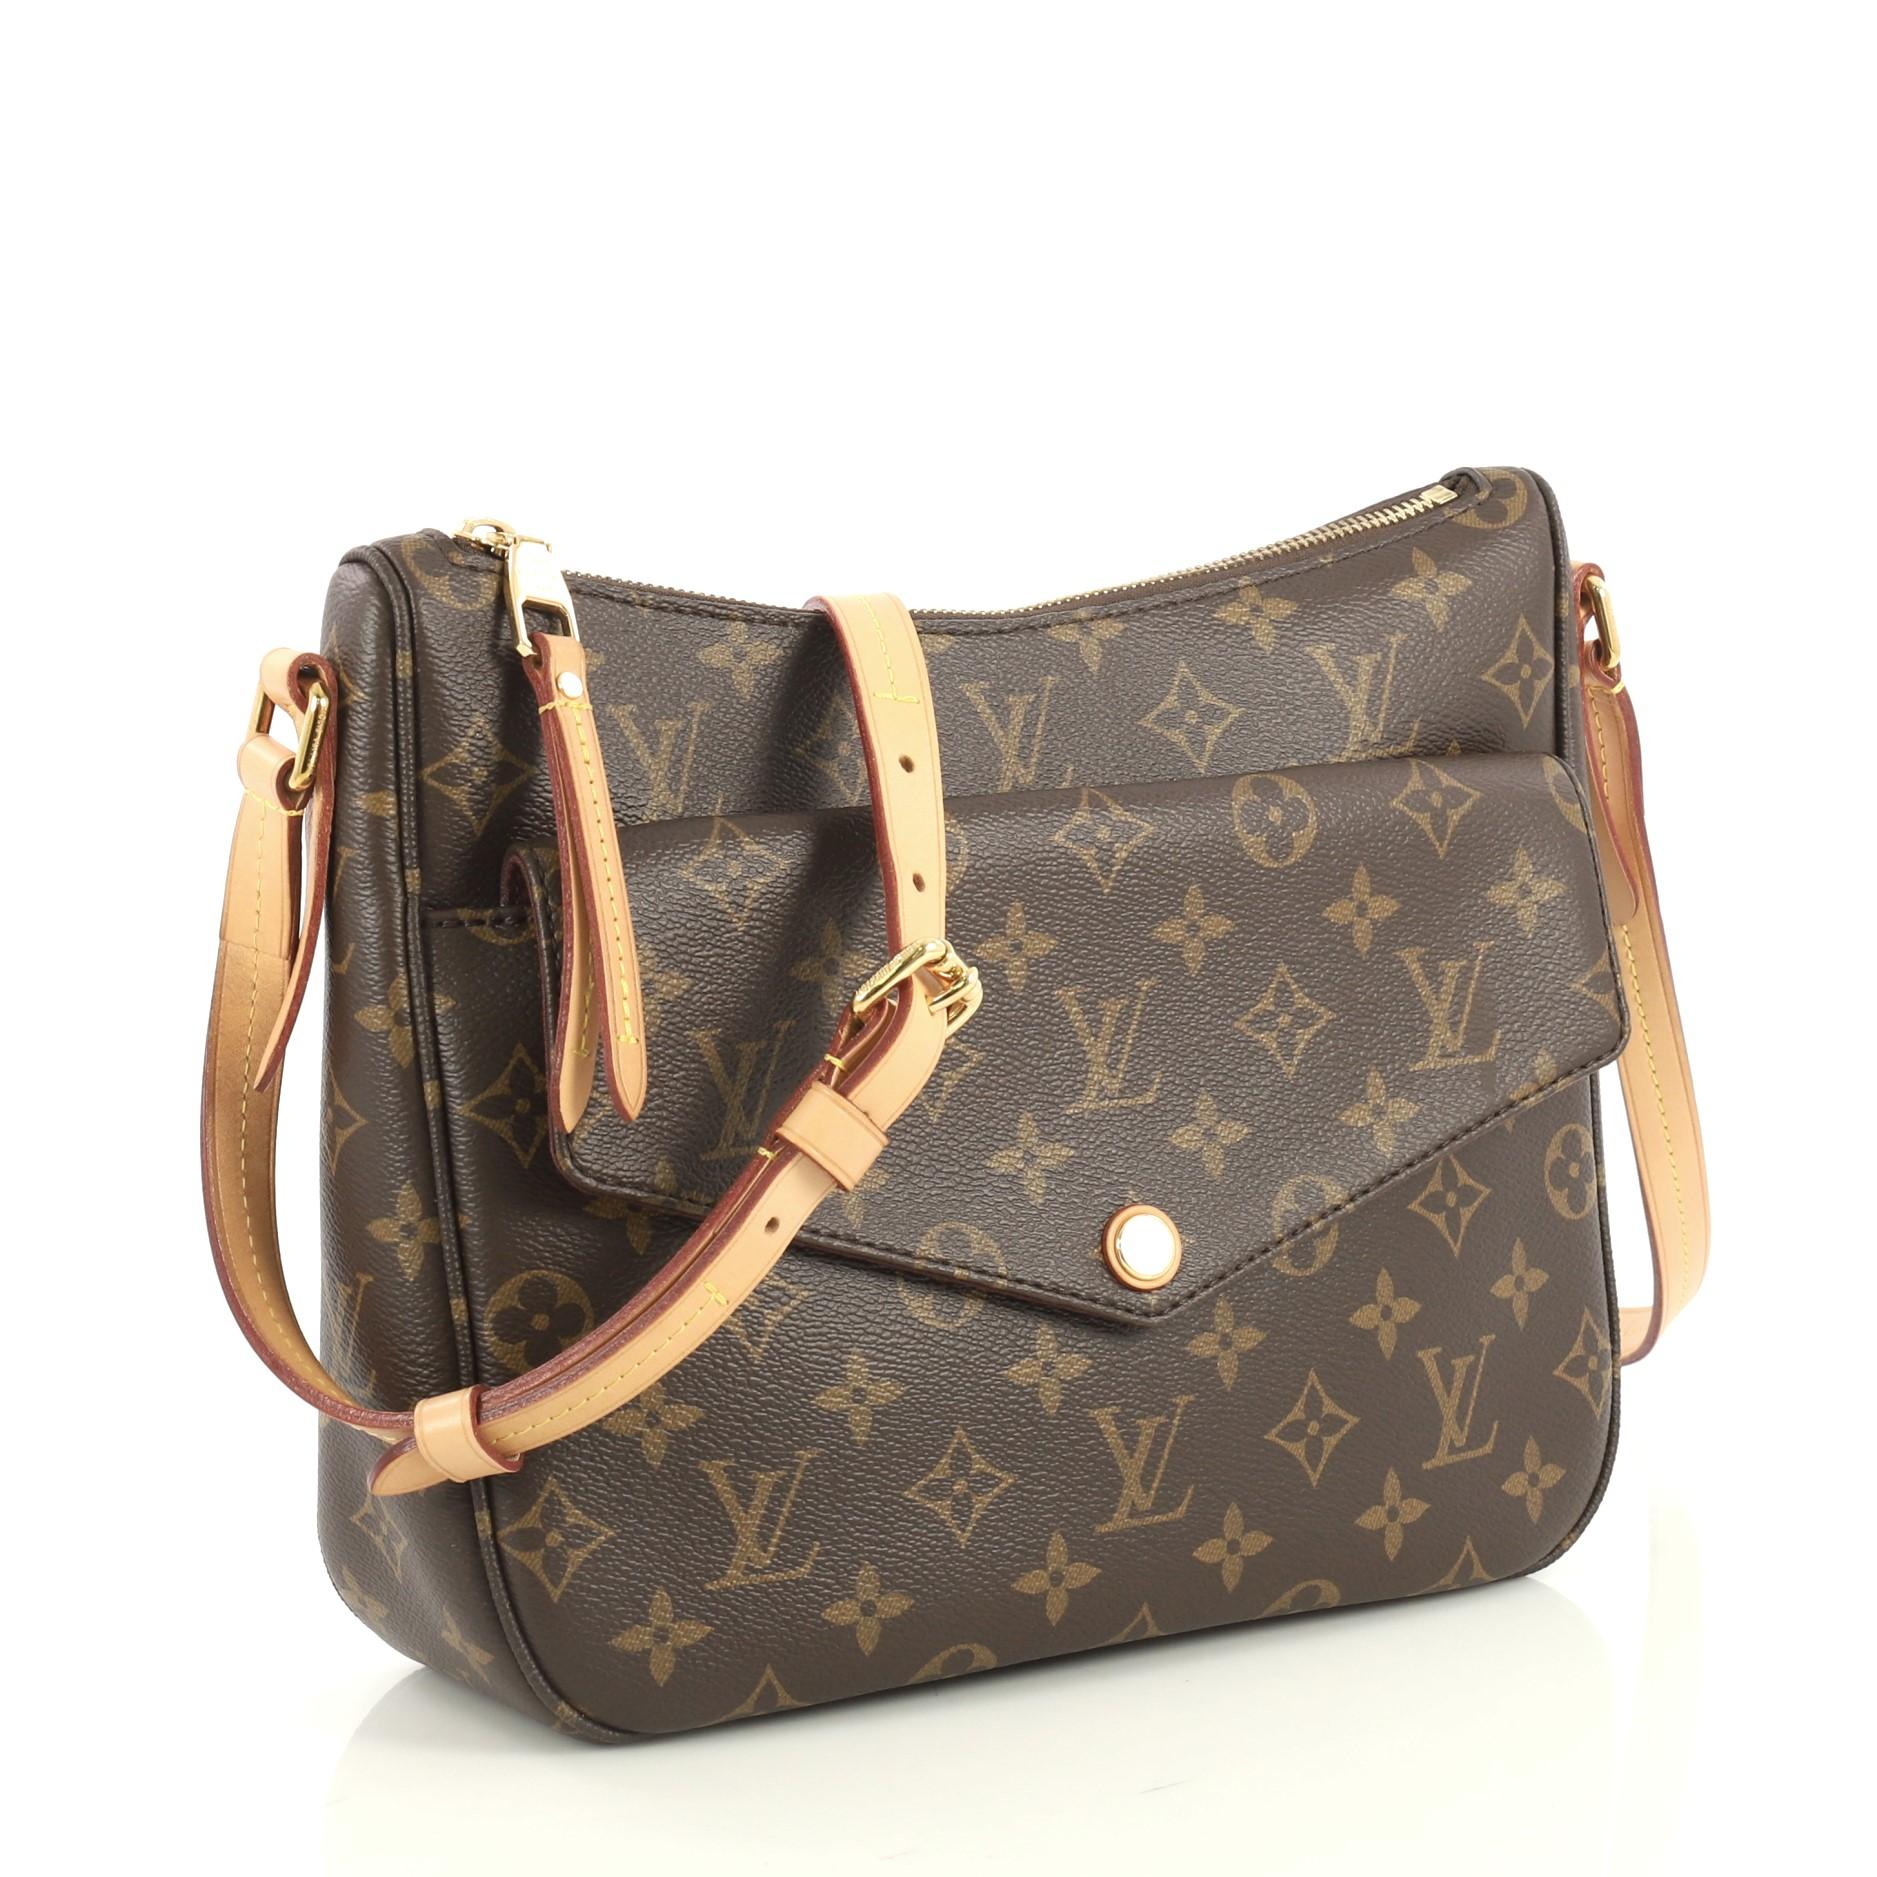 This Louis Vuitton Mabillon Shoulder Bag Monogram Canvas, crafted from brown monogram canvas, features an adjustable natural cowhide leather strap, exterior front snap pocket, and gold-tone hardware. Its zip closure opens to a red fabric interior.